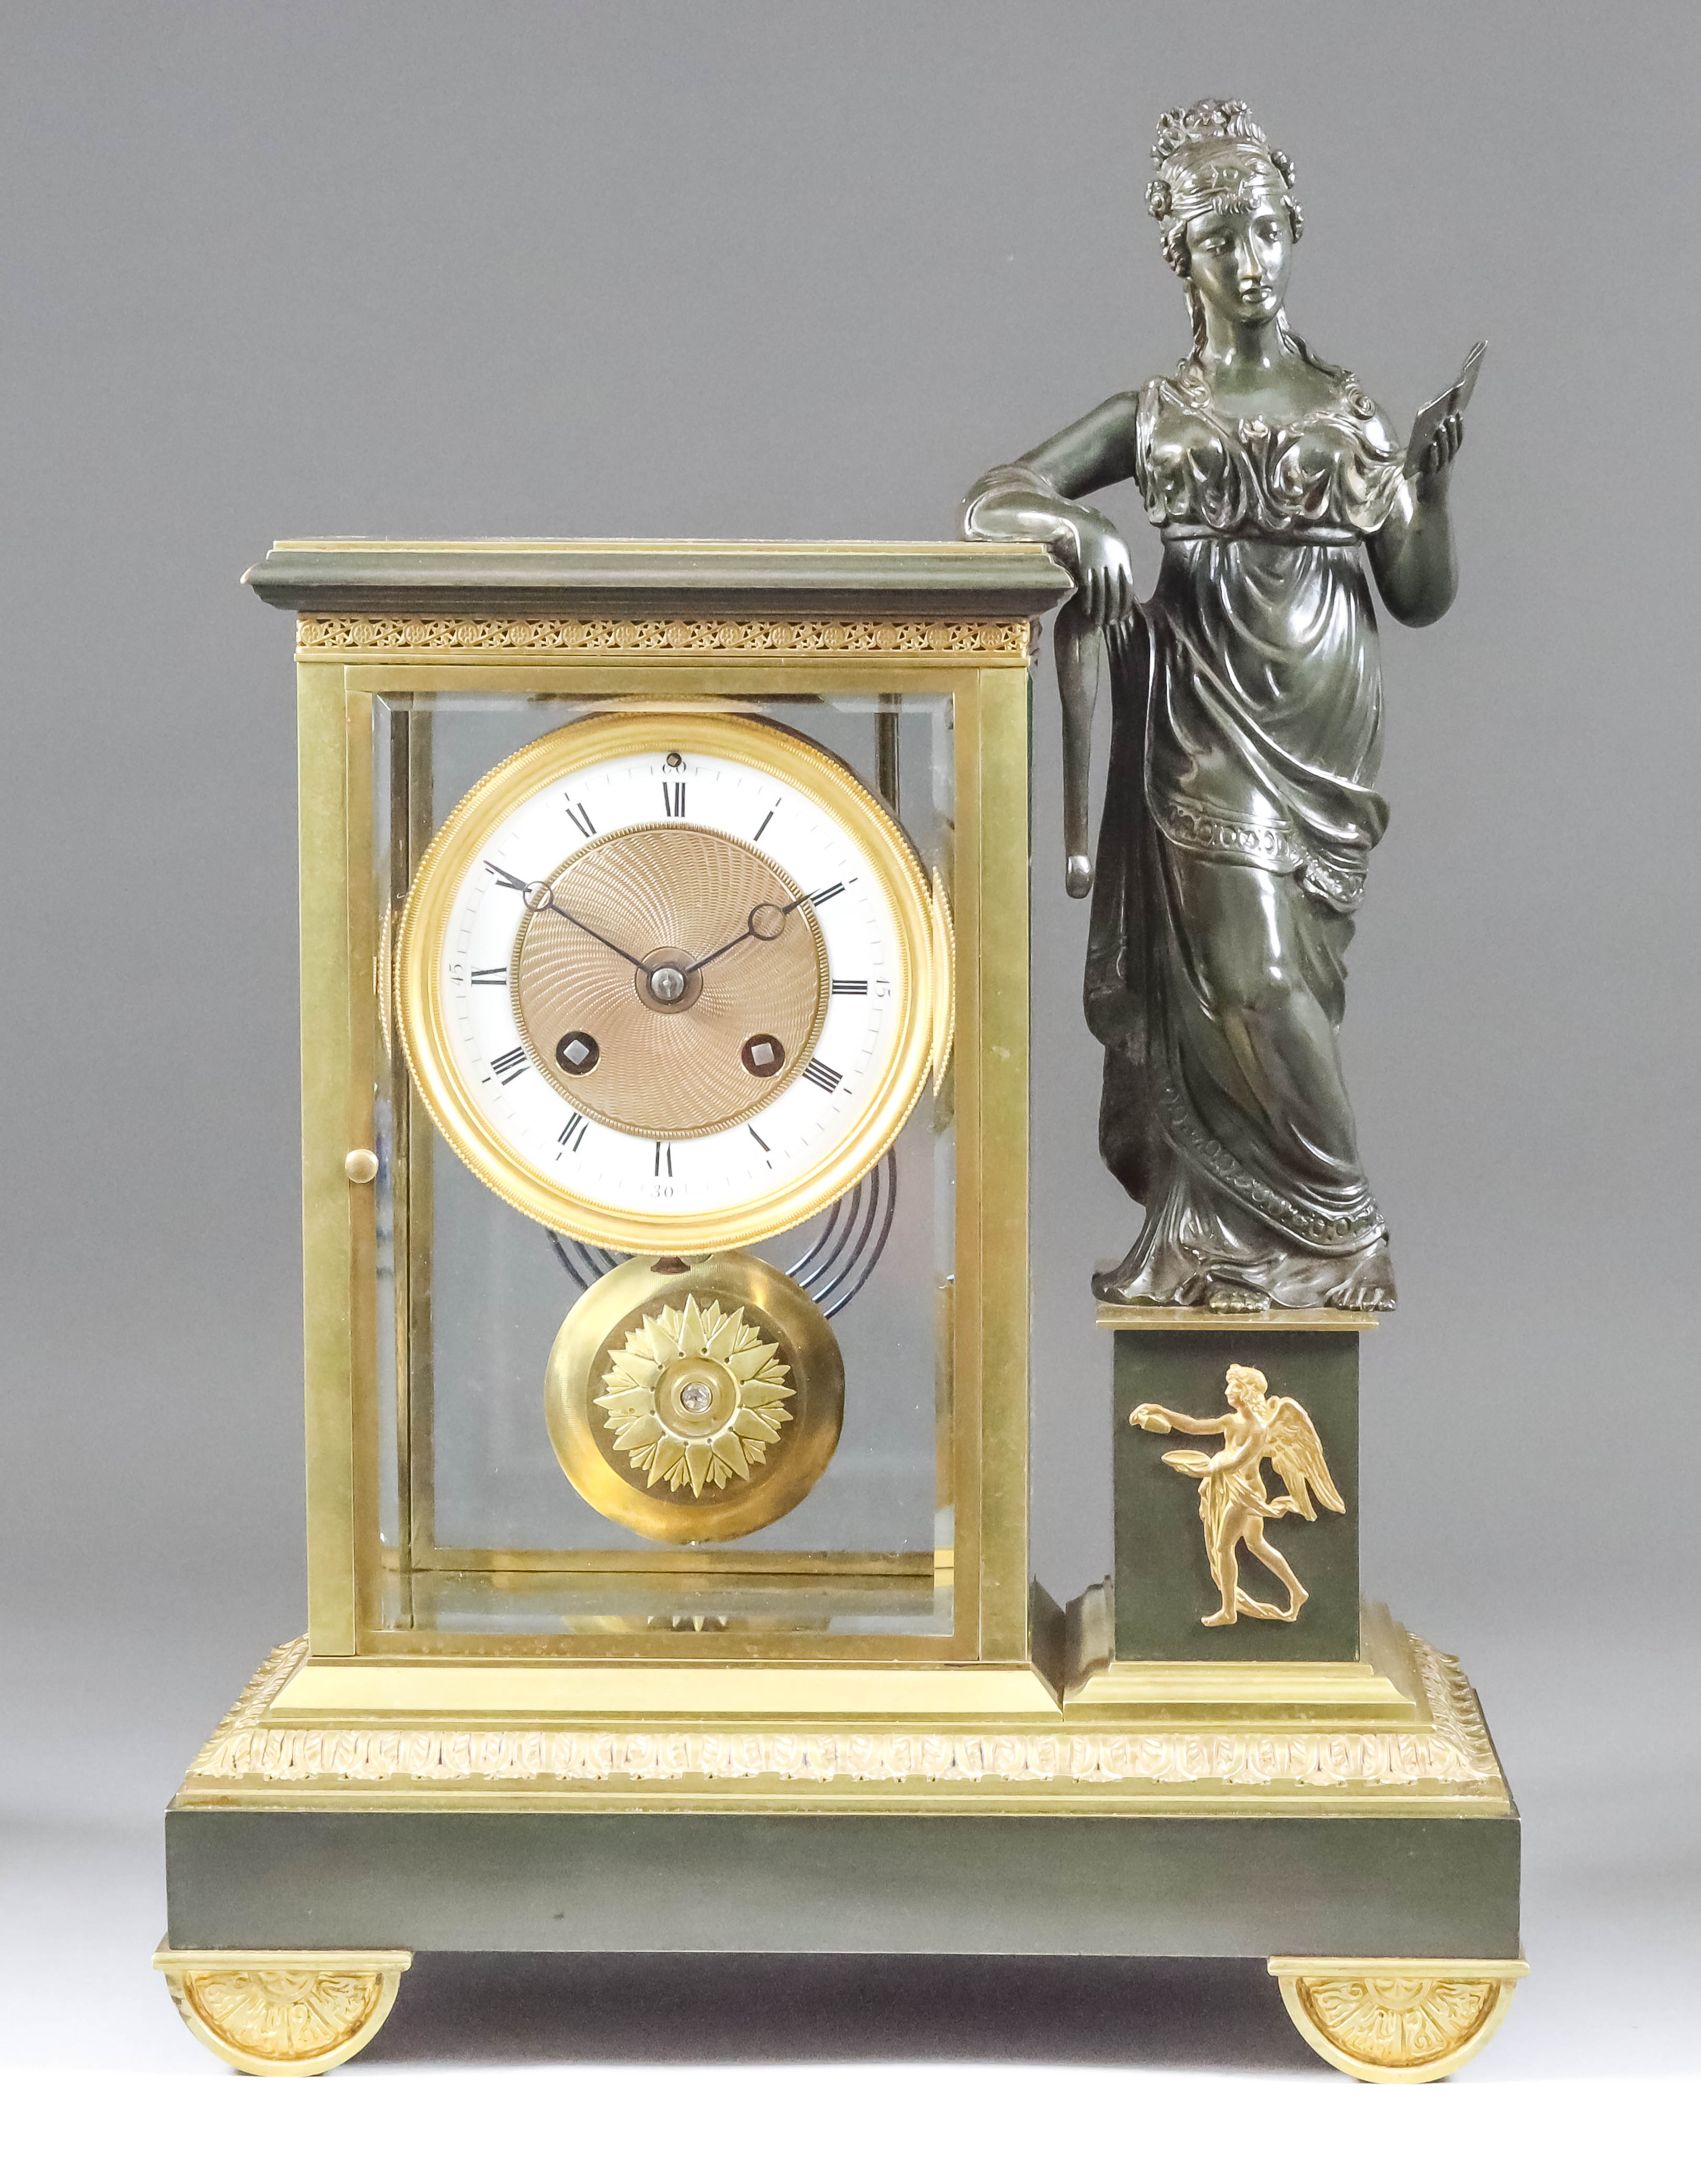 A French Gilt Brass and Bronzed metal "Four Glass" Mantel Clock, Late 19th Century, No. 1543, the